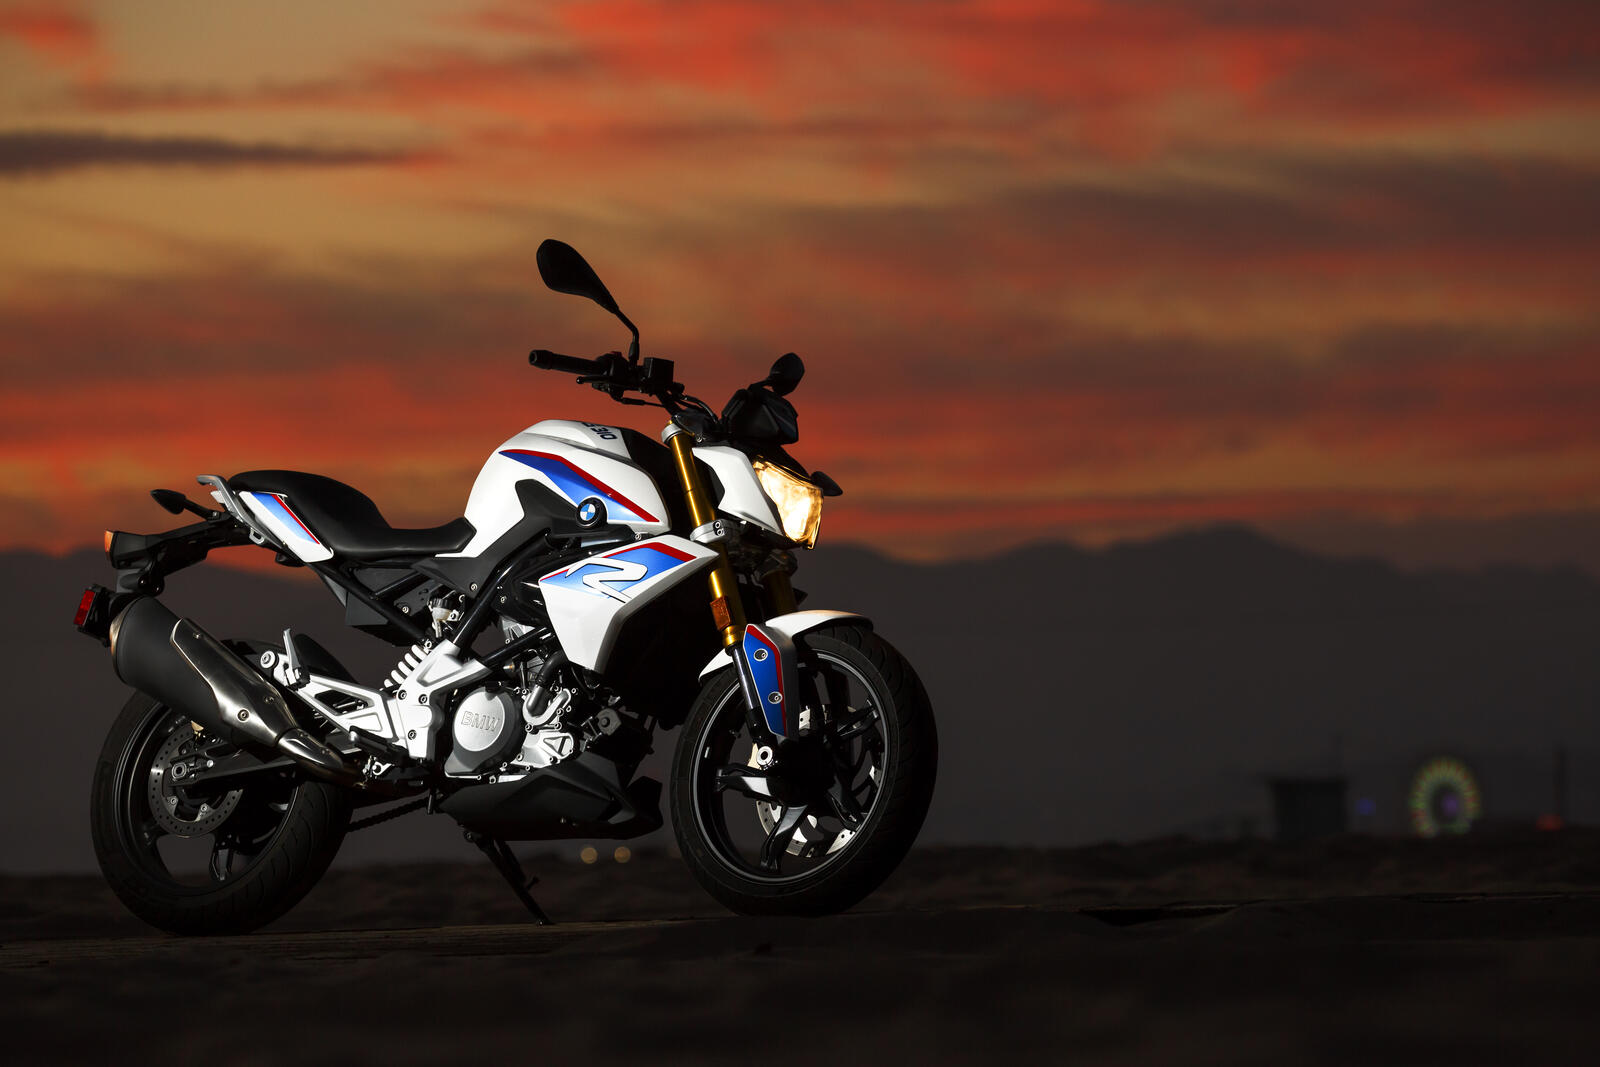 Wallpapers motorcycles BMW cars on the desktop